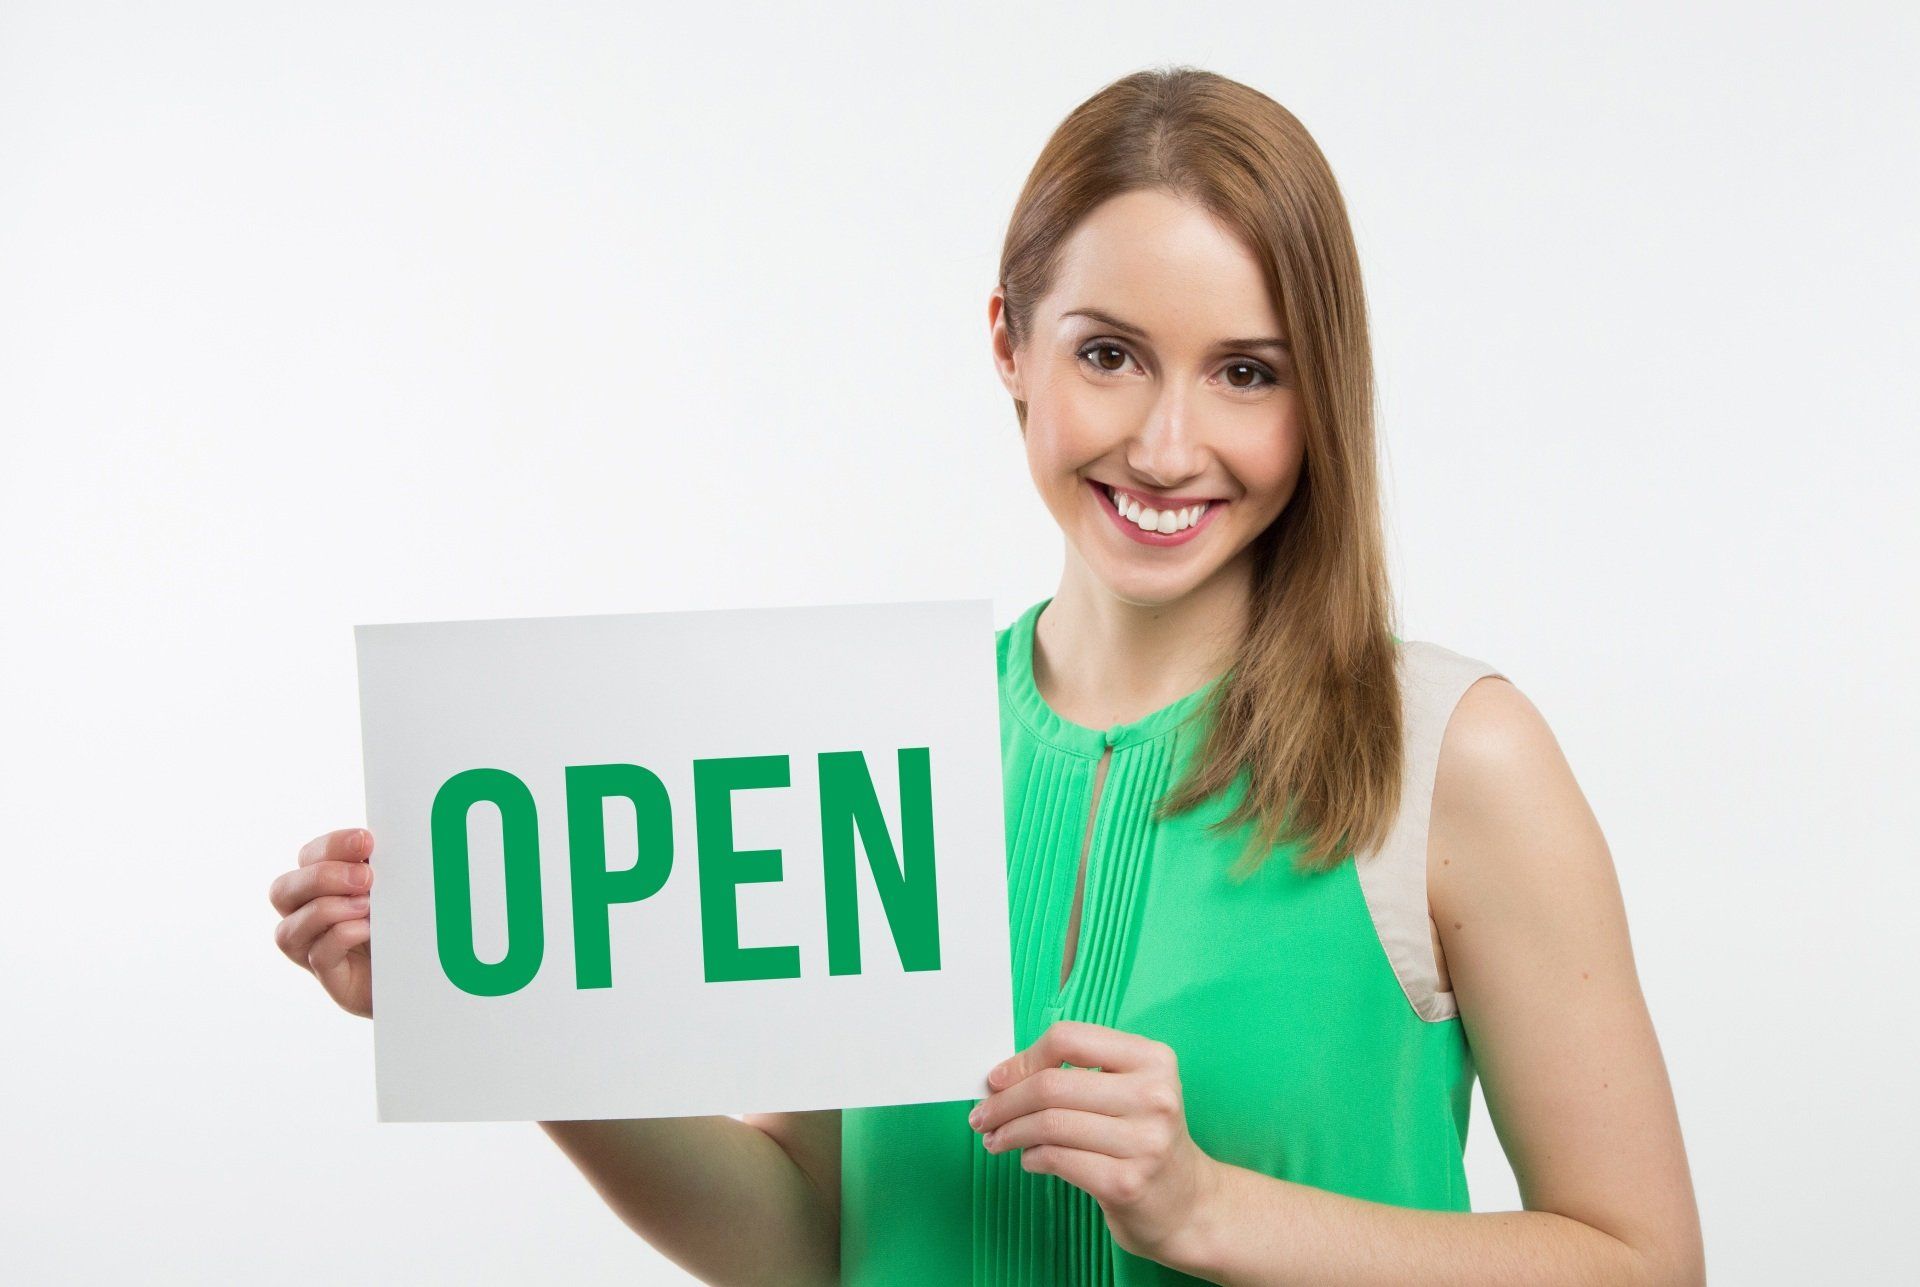 Image of a lady holding an open sign